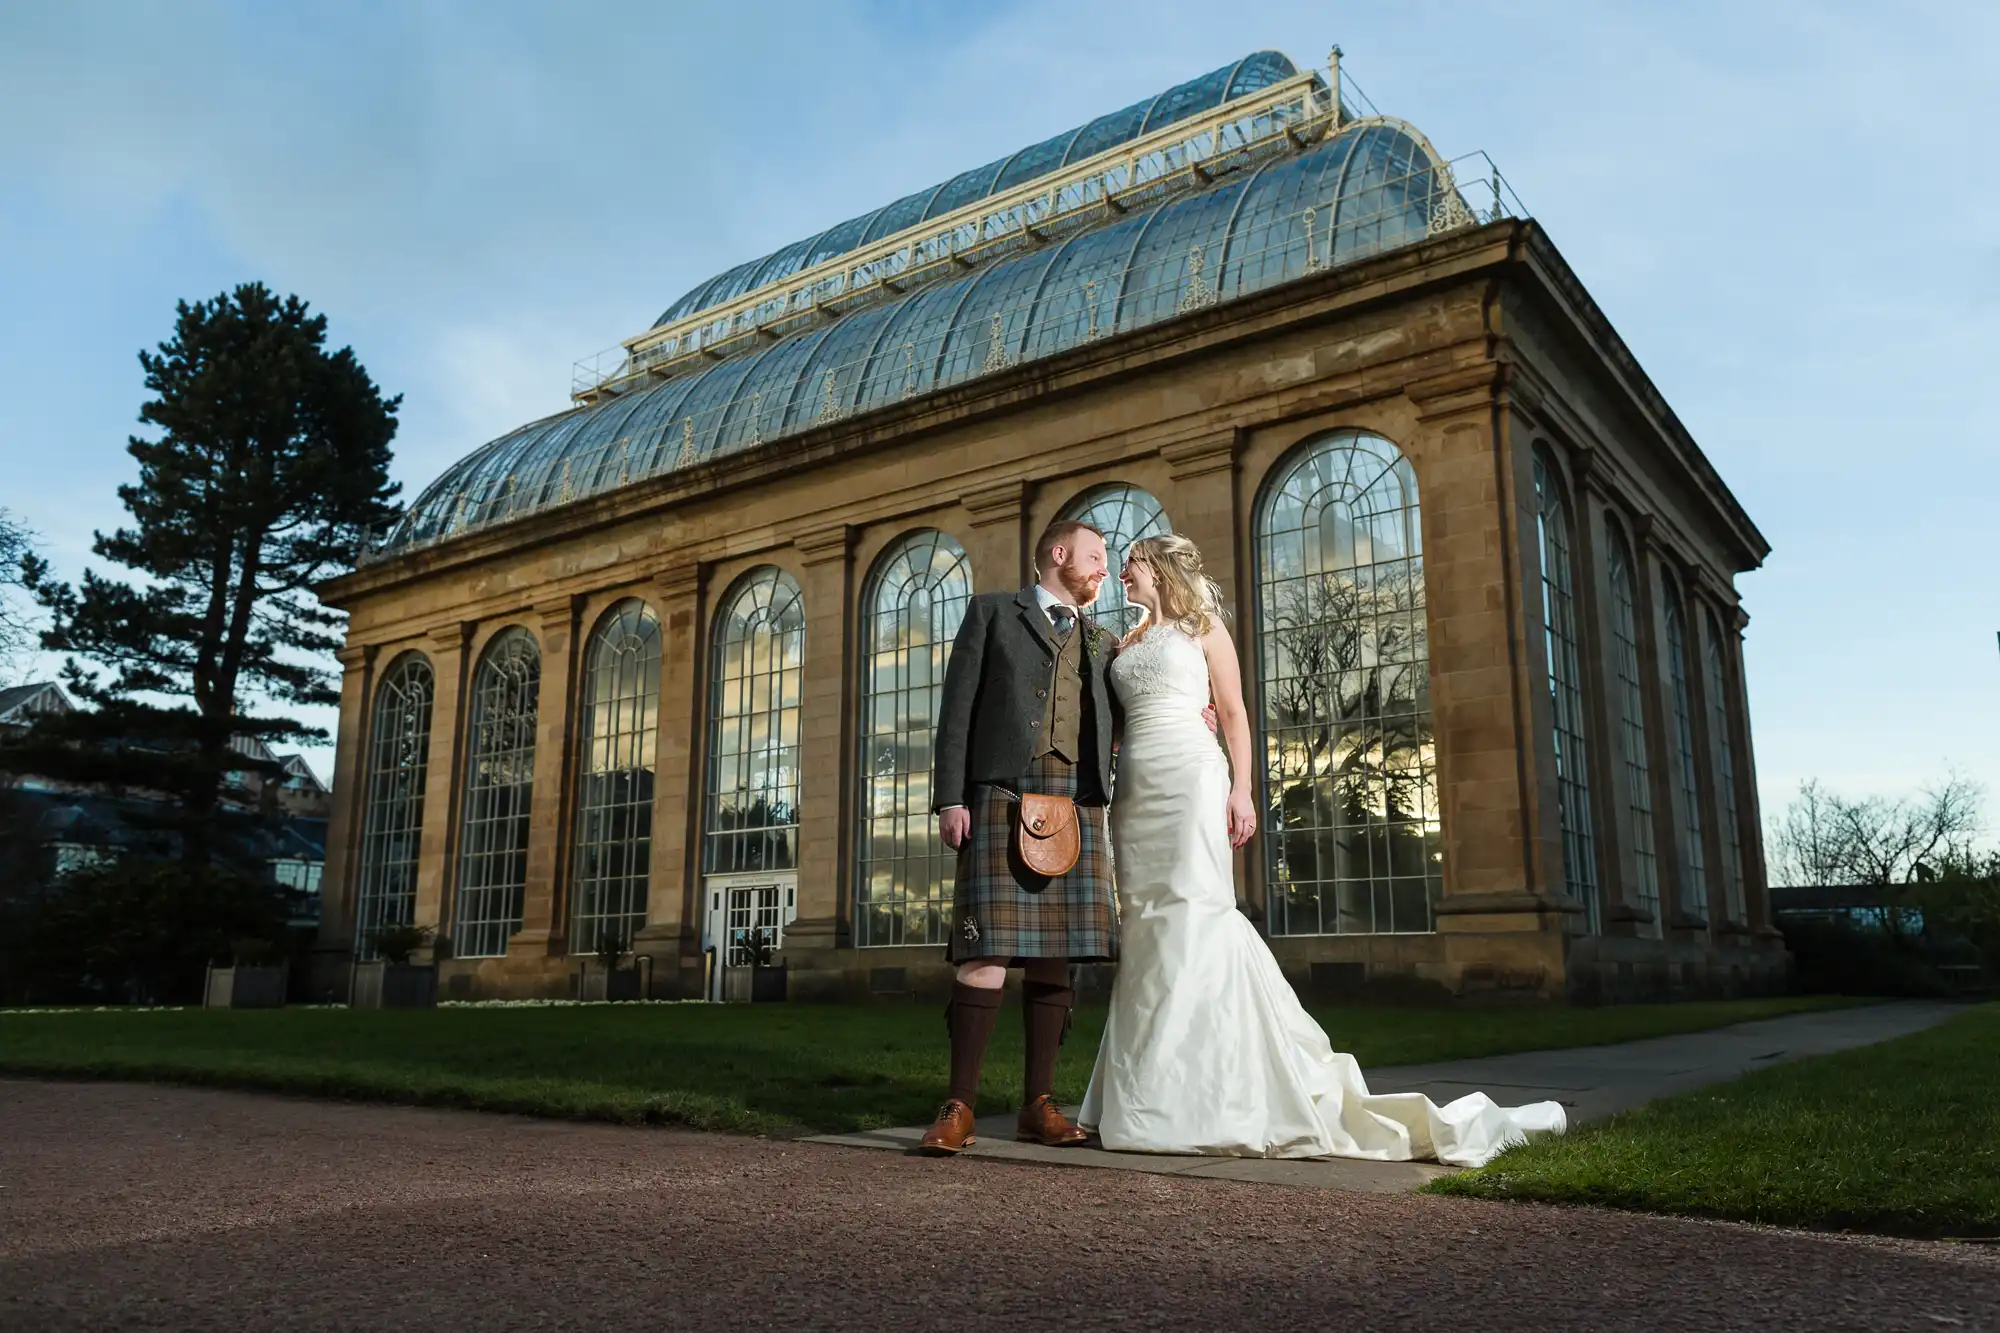 A couple in wedding attire stands in front of a large, glass-domed building. The groom is in a kilt and jacket, while the bride wears a strapless white gown with a long train.